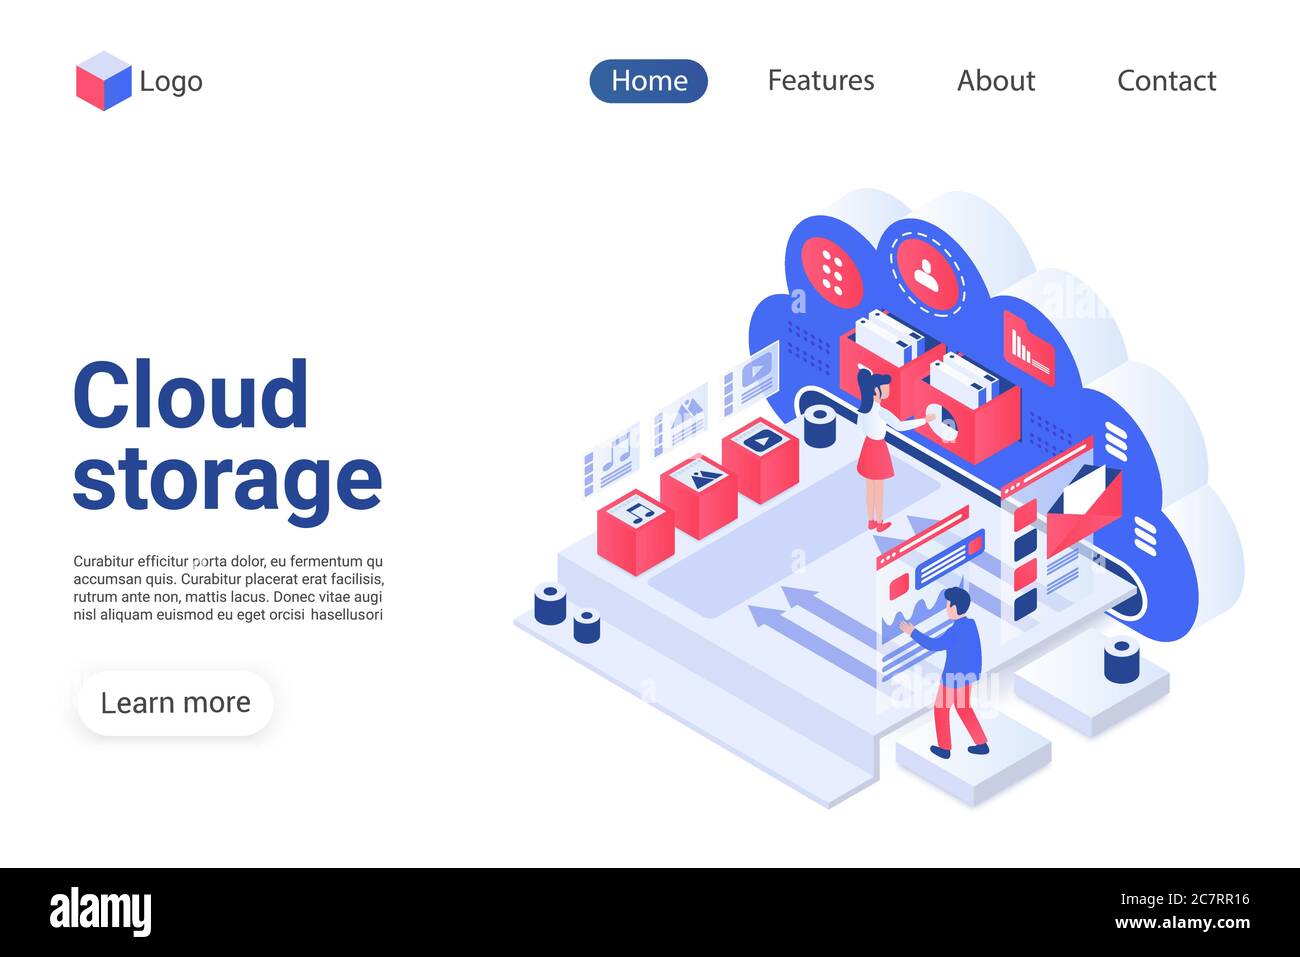 Cloud storage landing page vector template. Wireless technology website homepage interface layout with isometric illustration. Remote data access, file management system web banner 3D concept Stock Vector